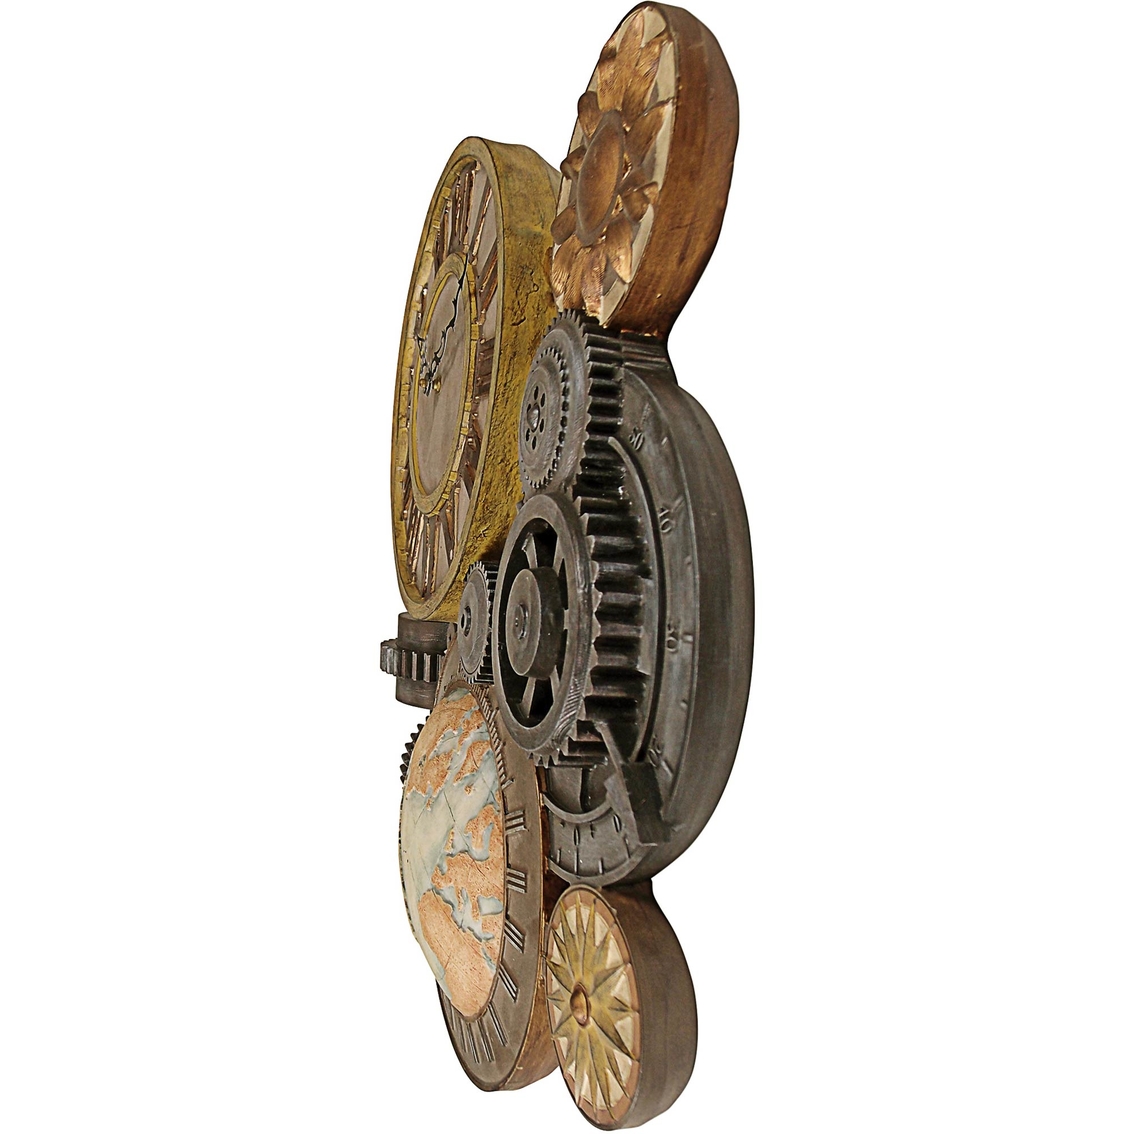 Design Toscano Gears of Time Sculptural Wall Clock - Image 2 of 3